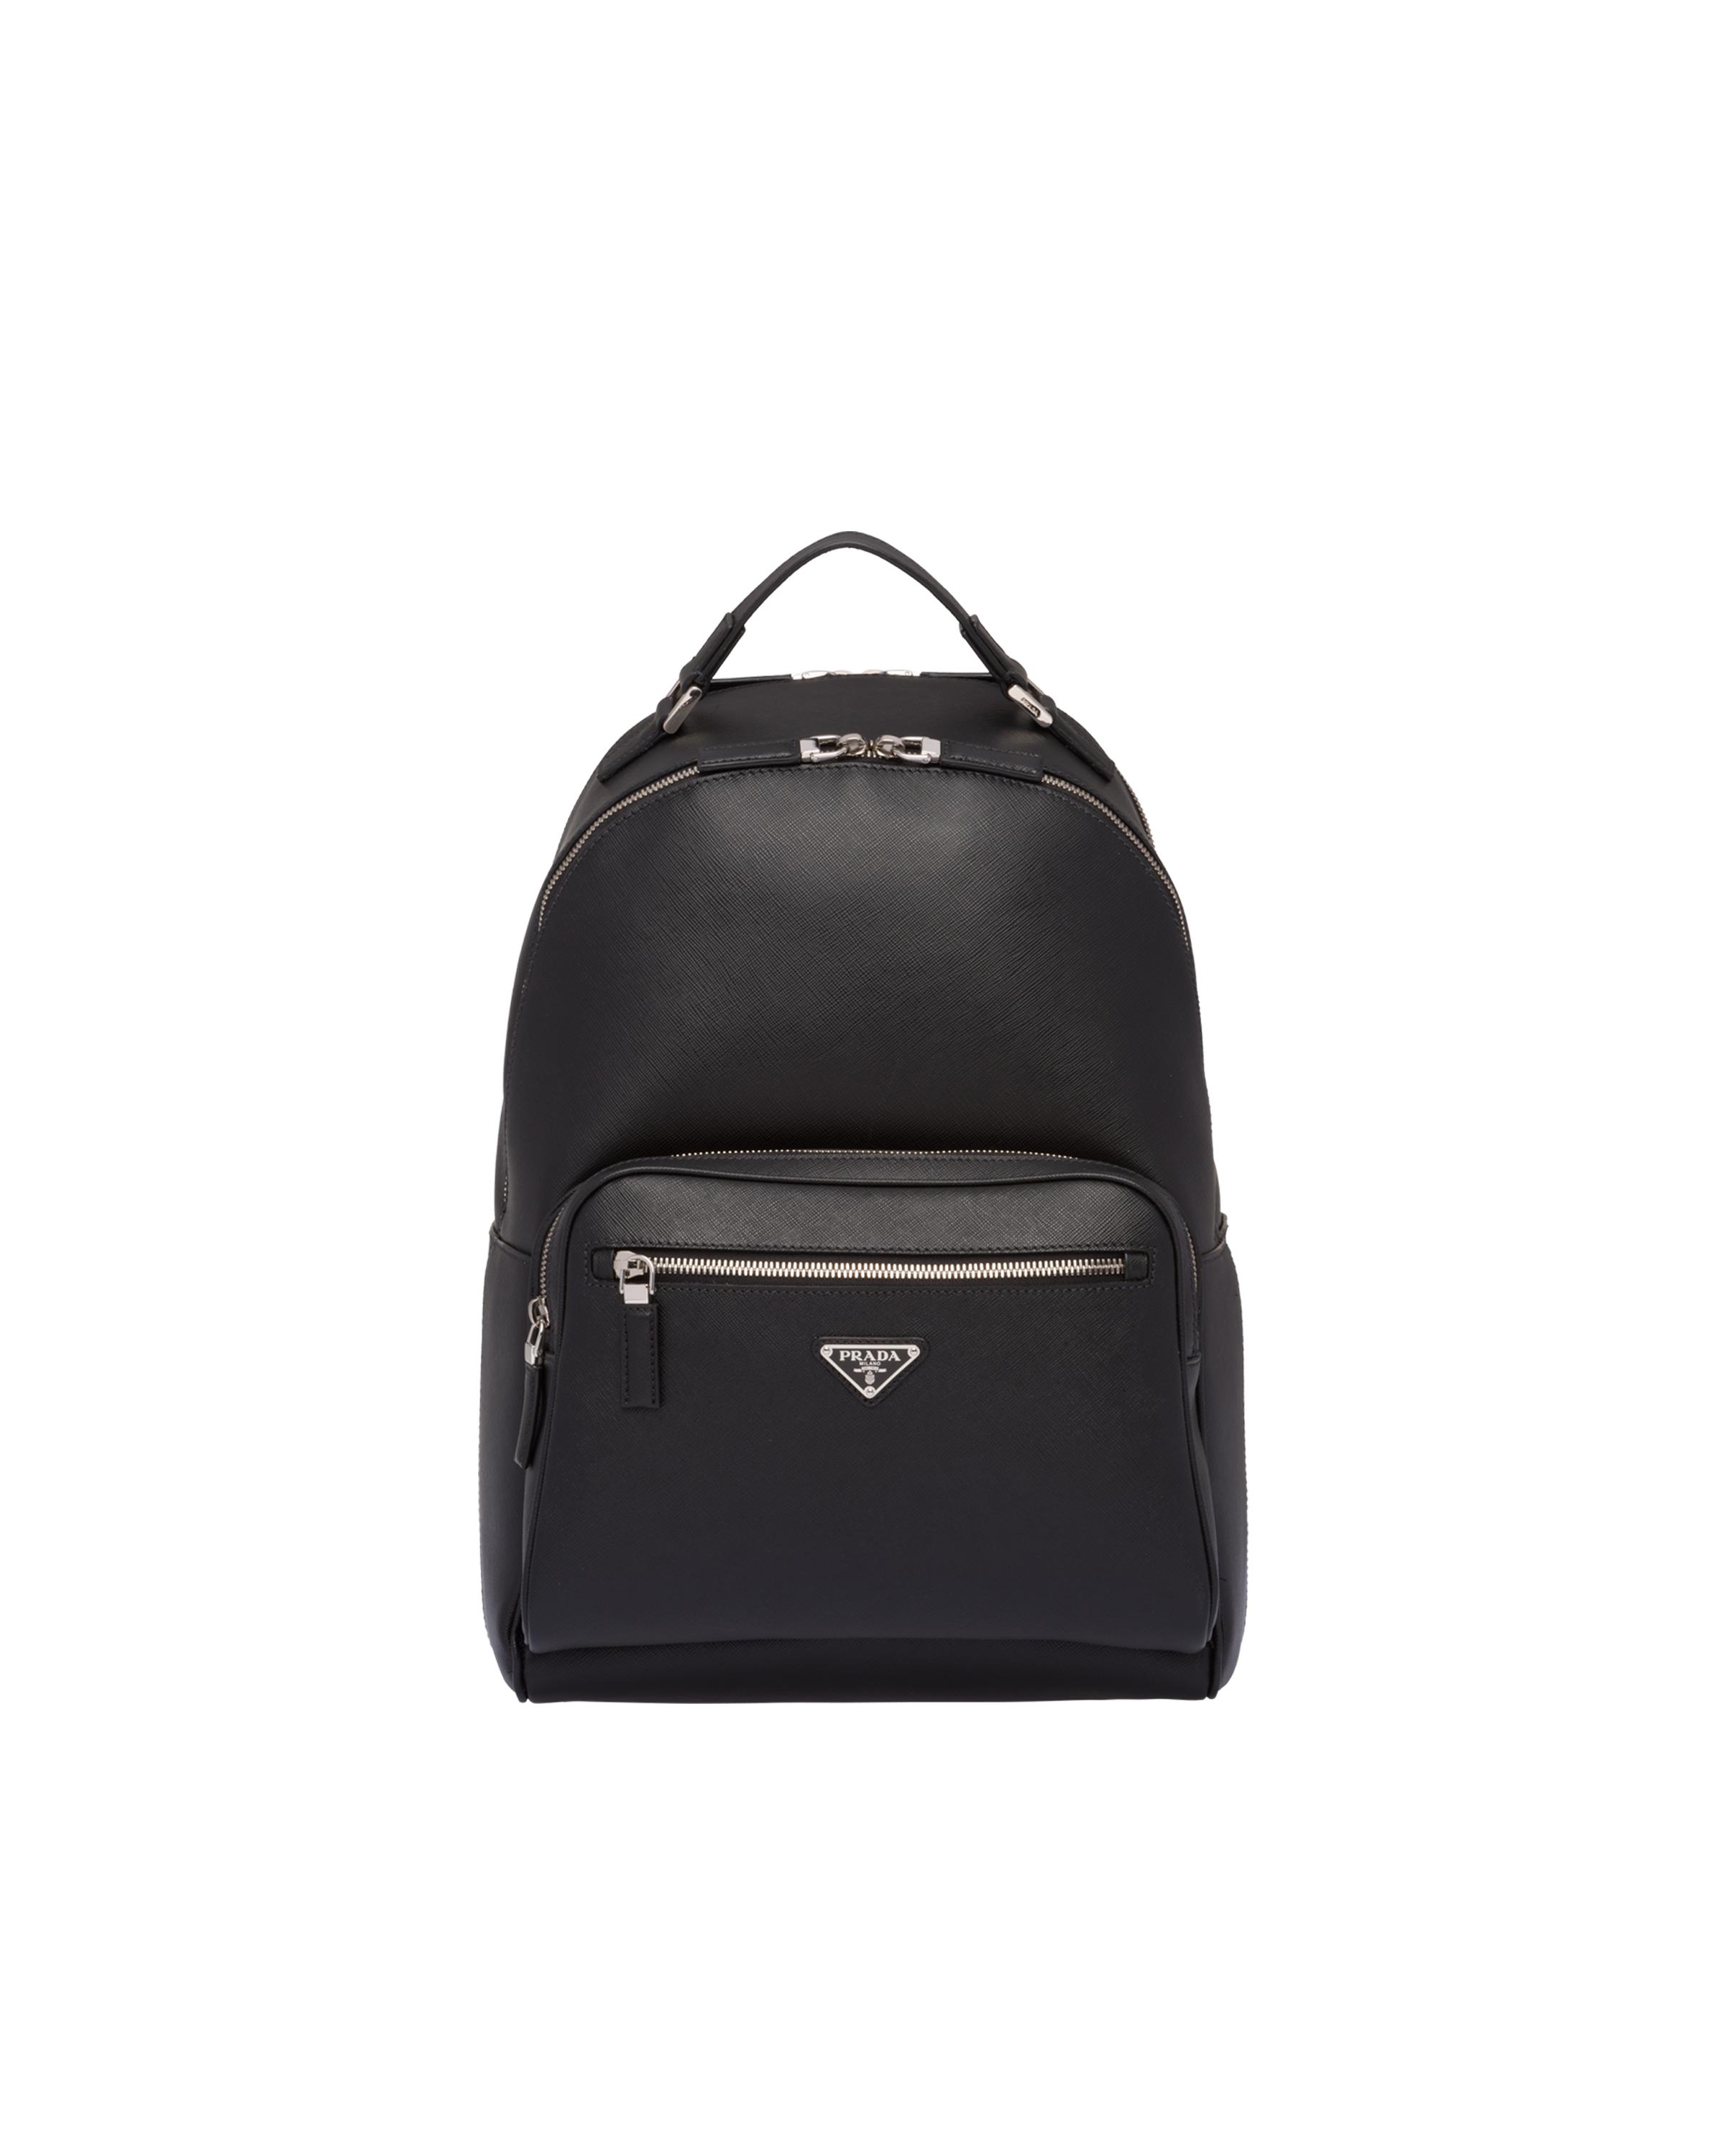 Prada Saffiano Leather Backpack In Black For Men Lyst, 45% OFF